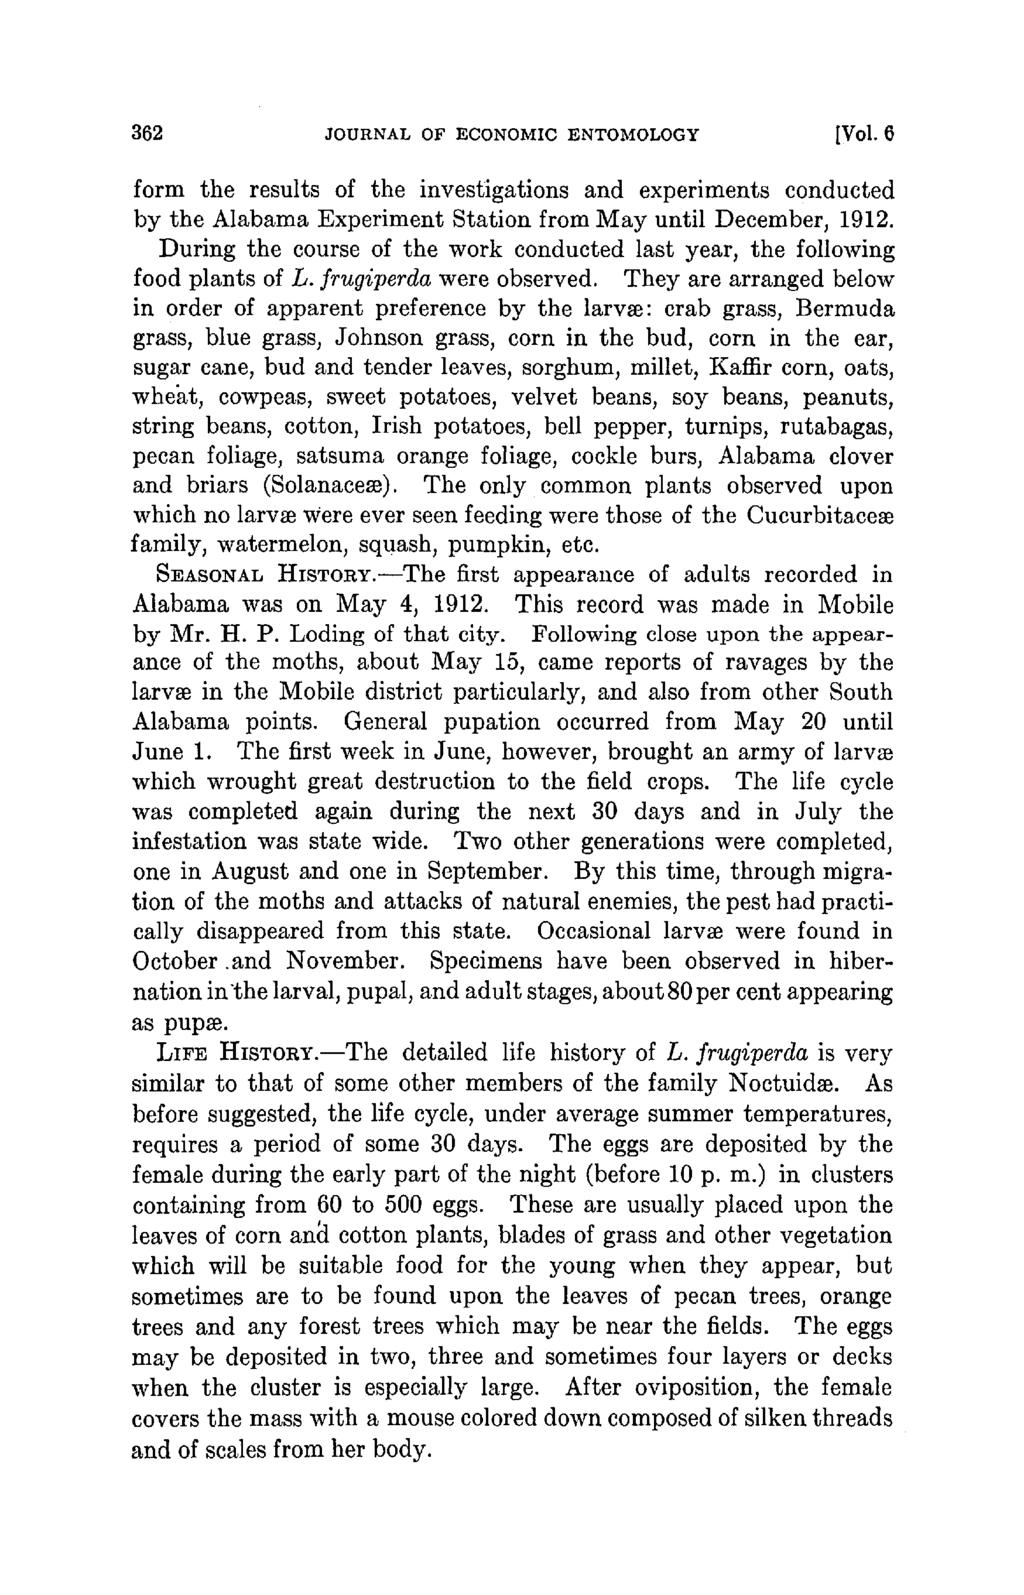 362 JOURNALOF ECONOMICENTOMOLOGY [Vol. 6 form the results of the investigations and experiments conducted by the Alabama Experiment Station from May until December, 1912.